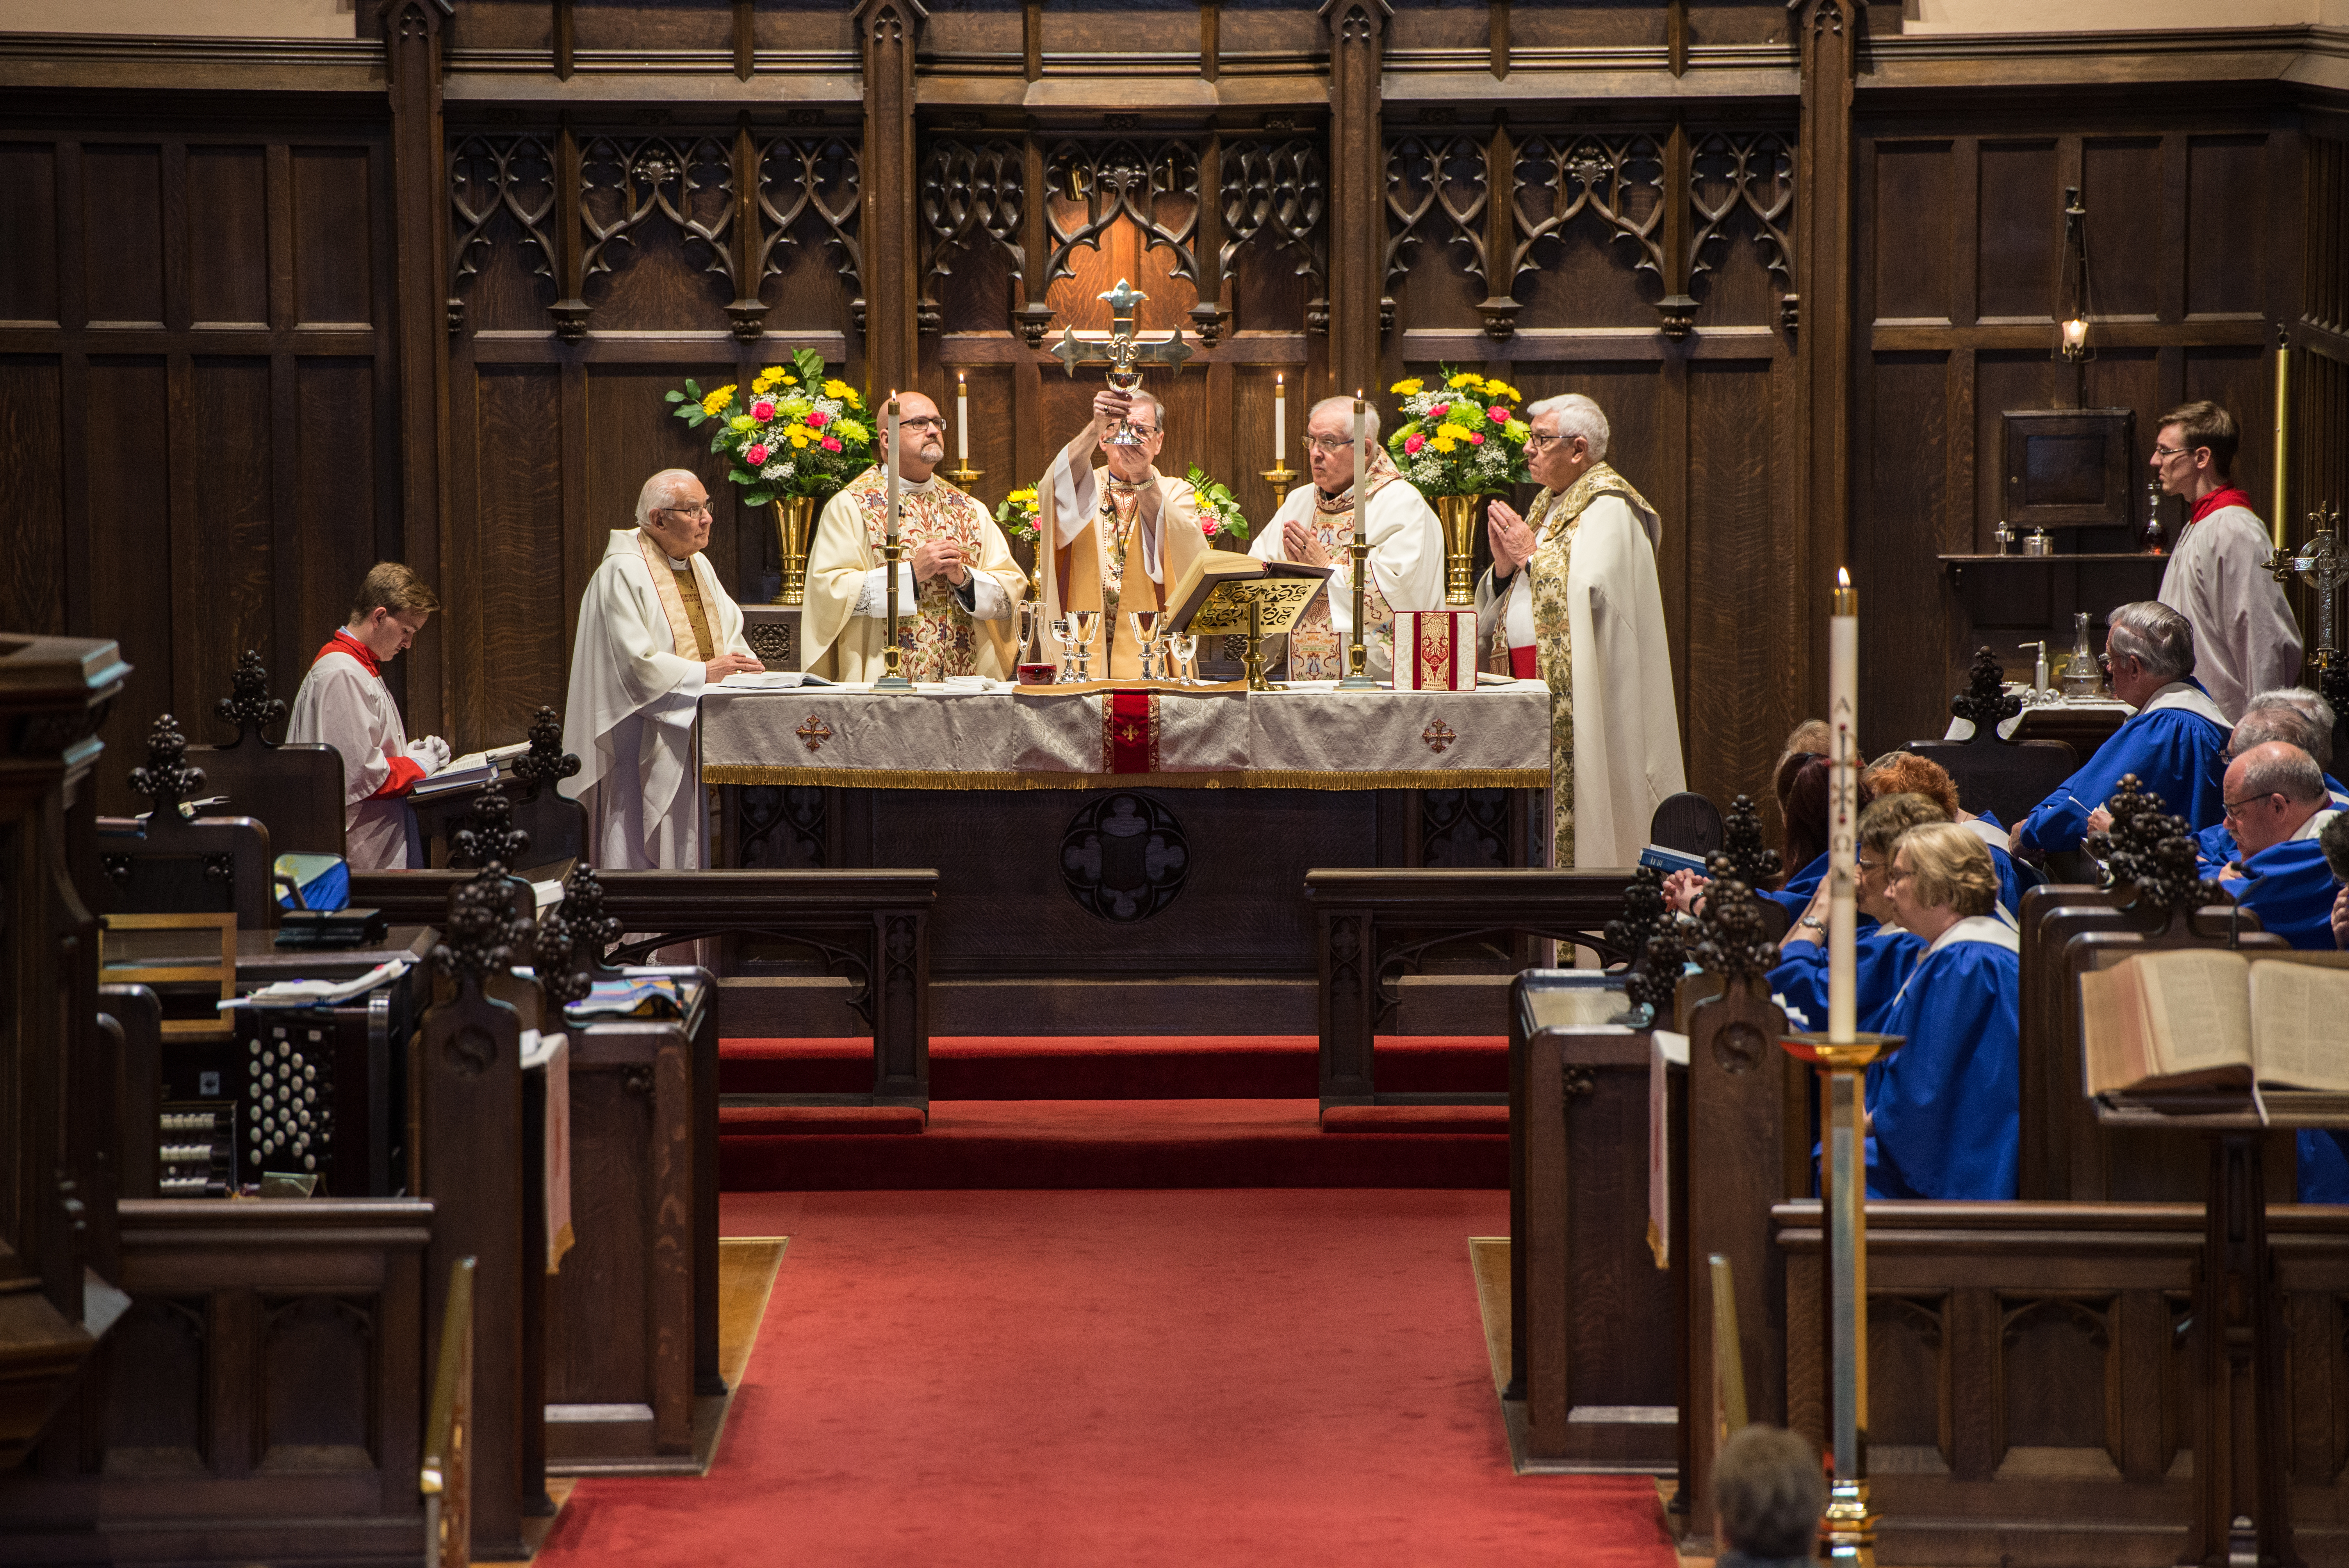 125th Anniversary Service with The Most Rev. Fred Hiltz, Primate of the Anglican Church (May 13, 2018)